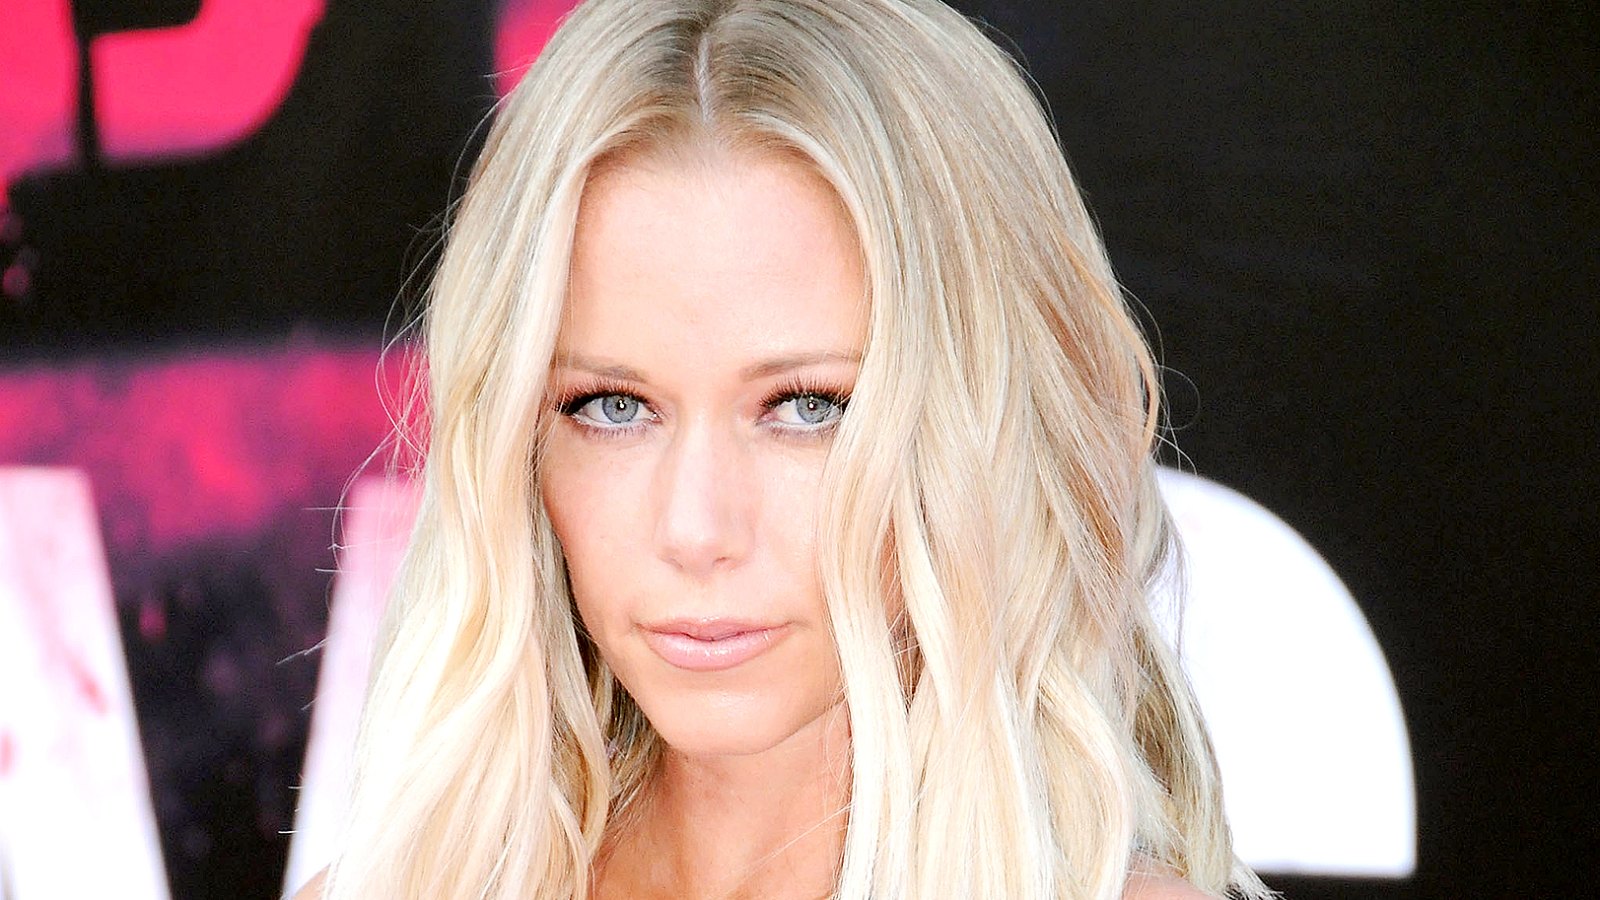 Kendra Wilkinson attends the premiere of STX Entertainment's' 'Bad Moms' at Mann Village Theatre on July 26, 2016 in Westwood, California.